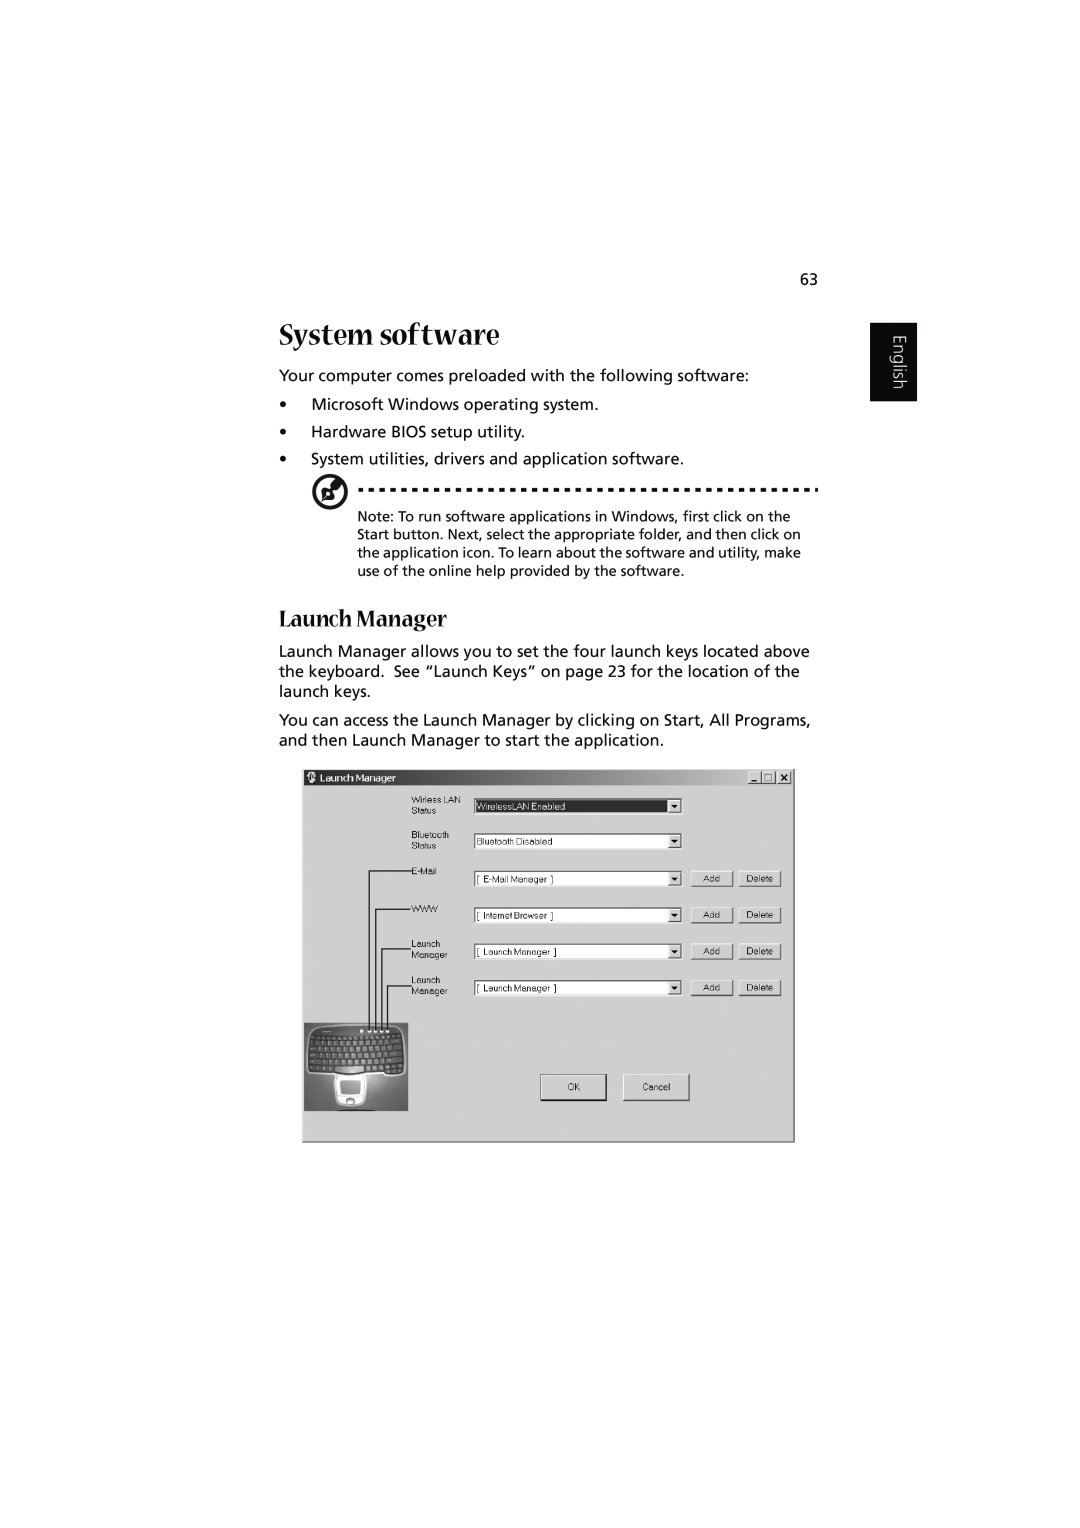 Acer 1450 manual System software, Launch Manager, English 